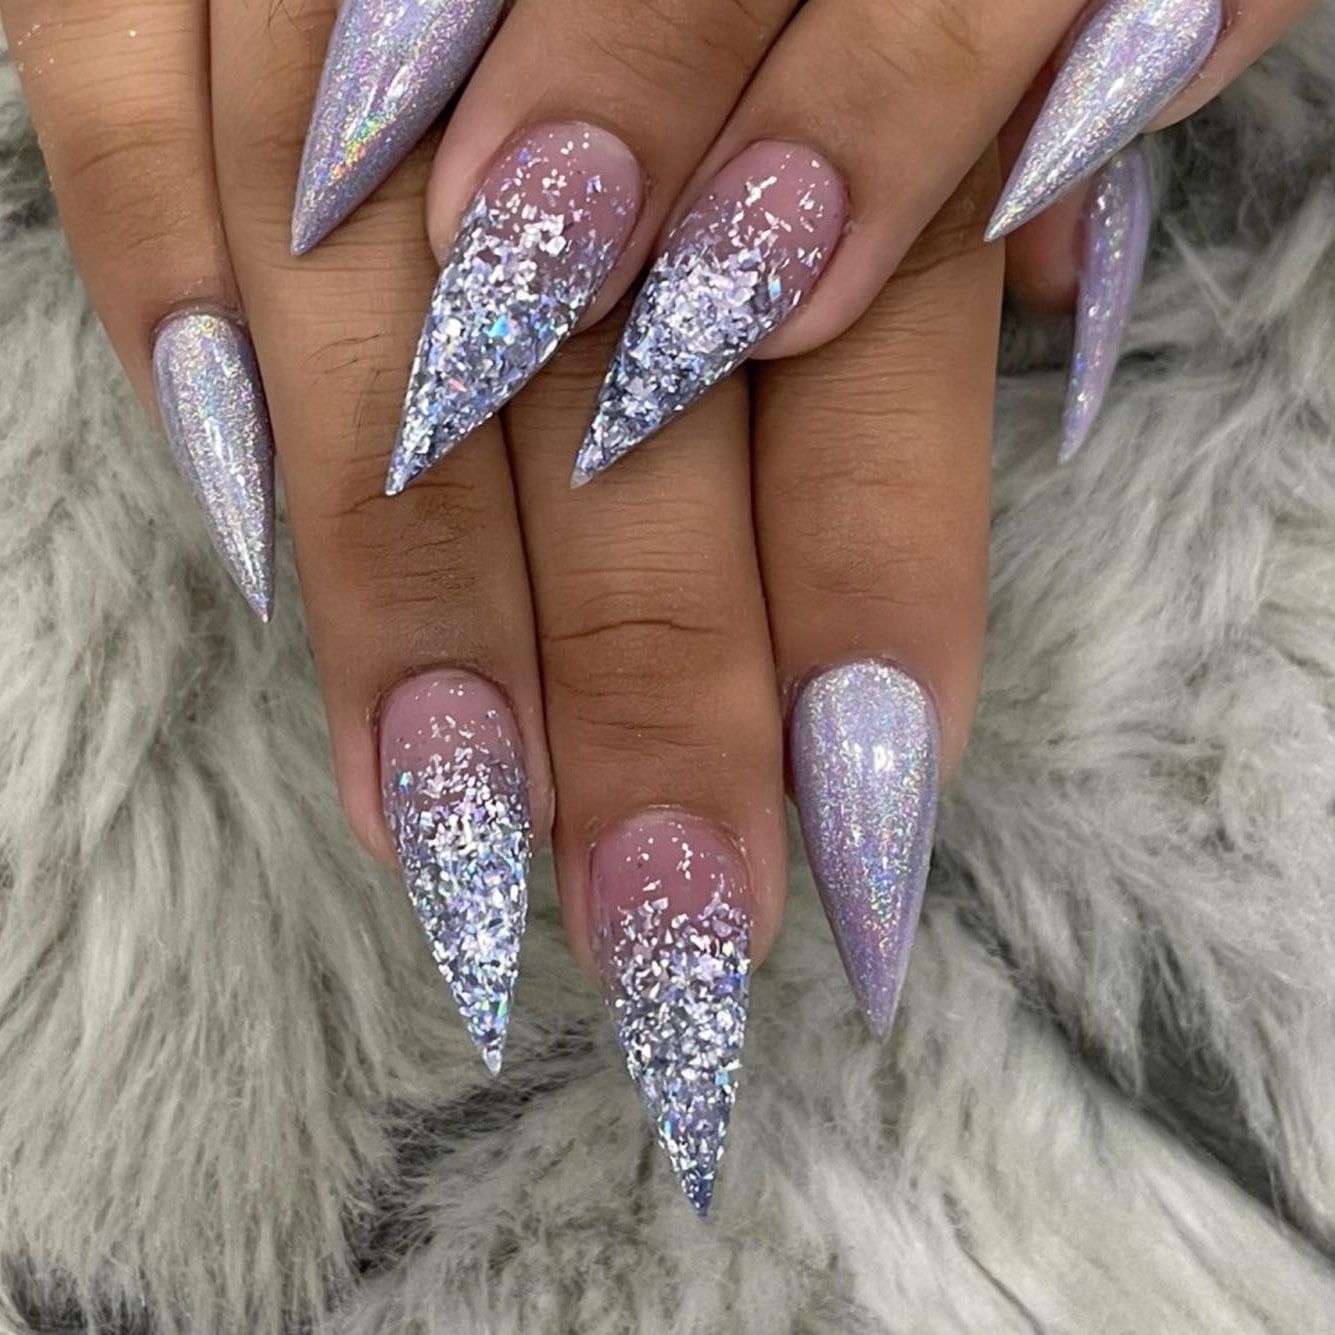 French ombre nails with glitter - 37 manicure ideas not just for Christmas